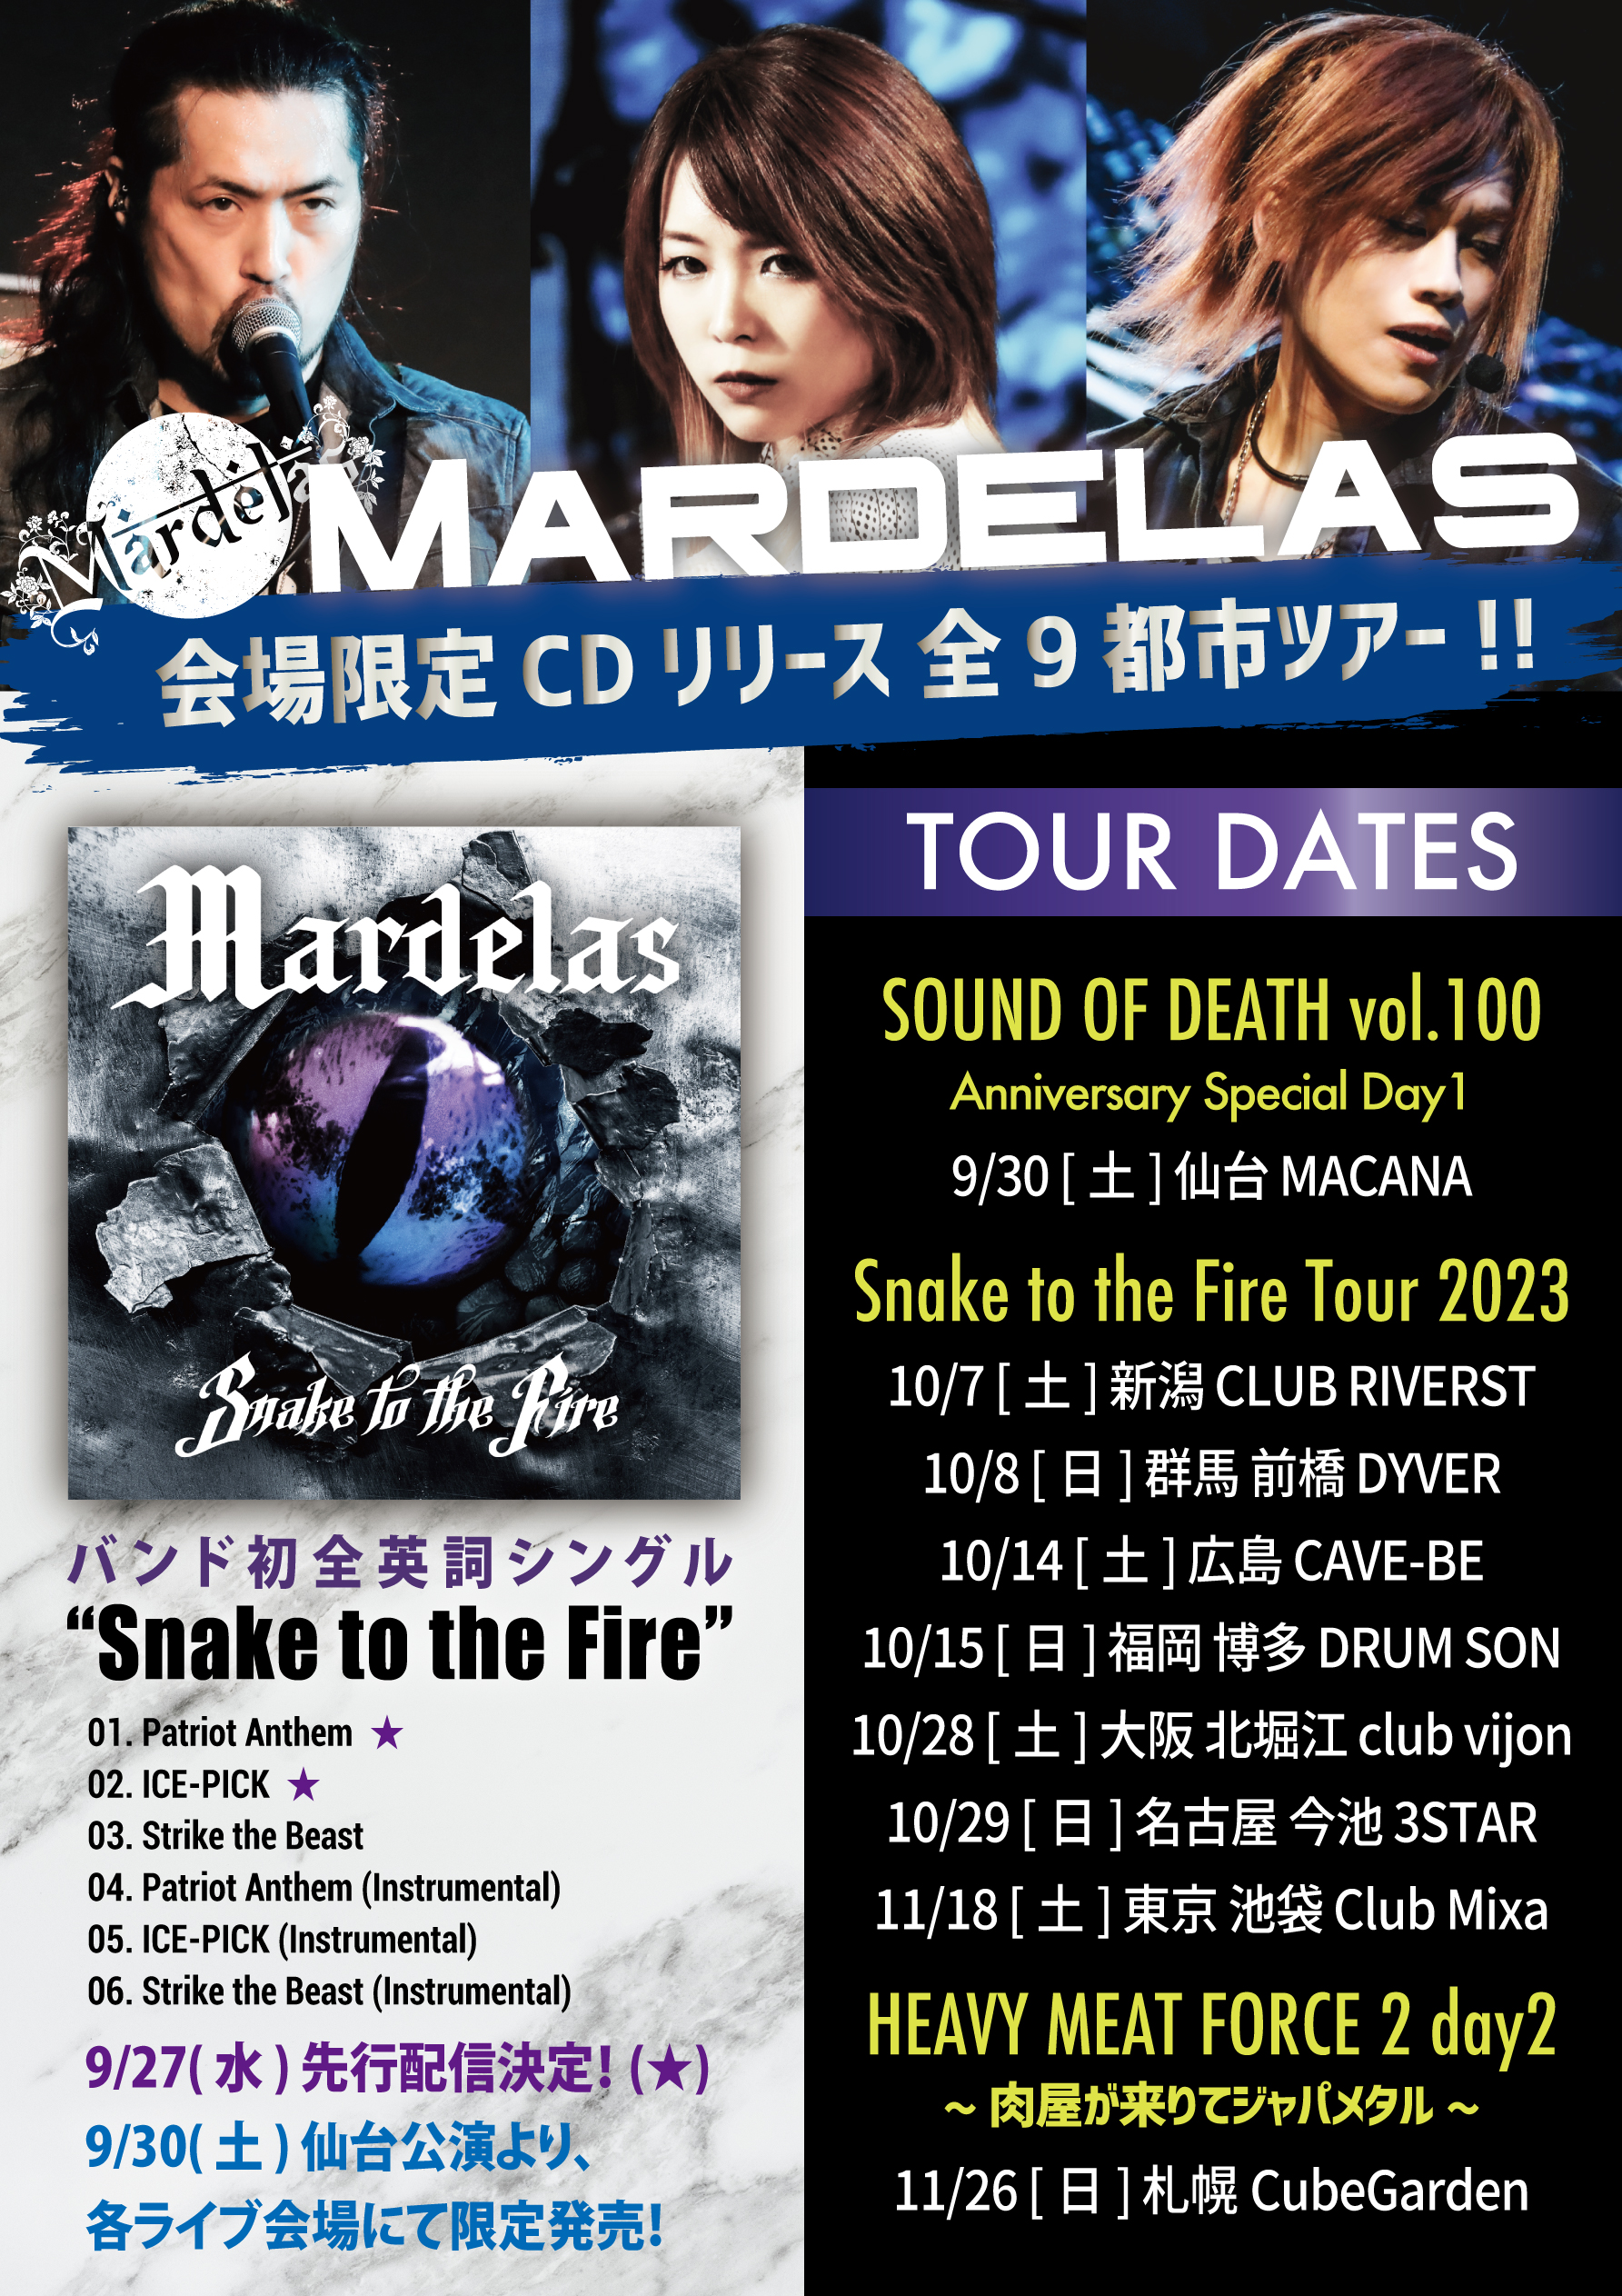 Mardelas Snake to the Fire CD